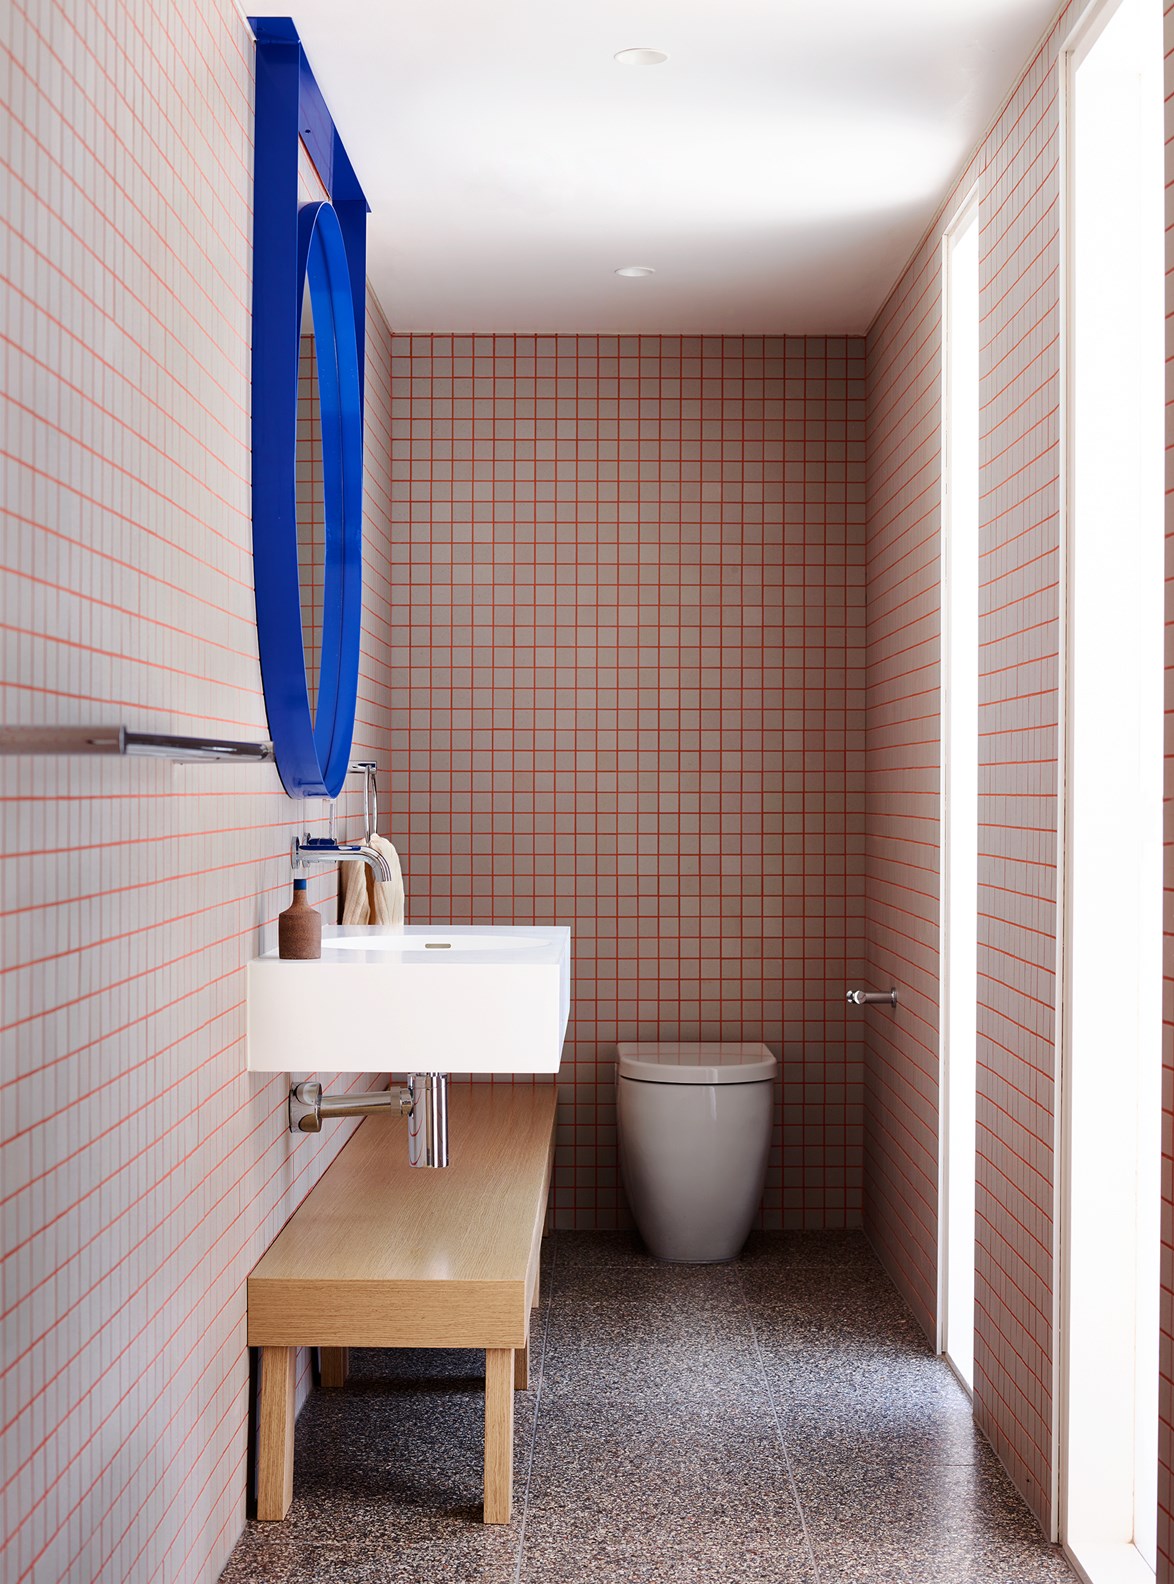 Design-wise, [powder rooms](https://www.homestolove.com.au/8-bathrooms-with-a-hint-of-glamour-1-6024|target="_blank") are an opportunity to go wild. Pink grouting push the graphic aesthetic of this space to the limit while terrazzo flooring grounds the entire look. *Photo: Mark Roper / Story: Belle*